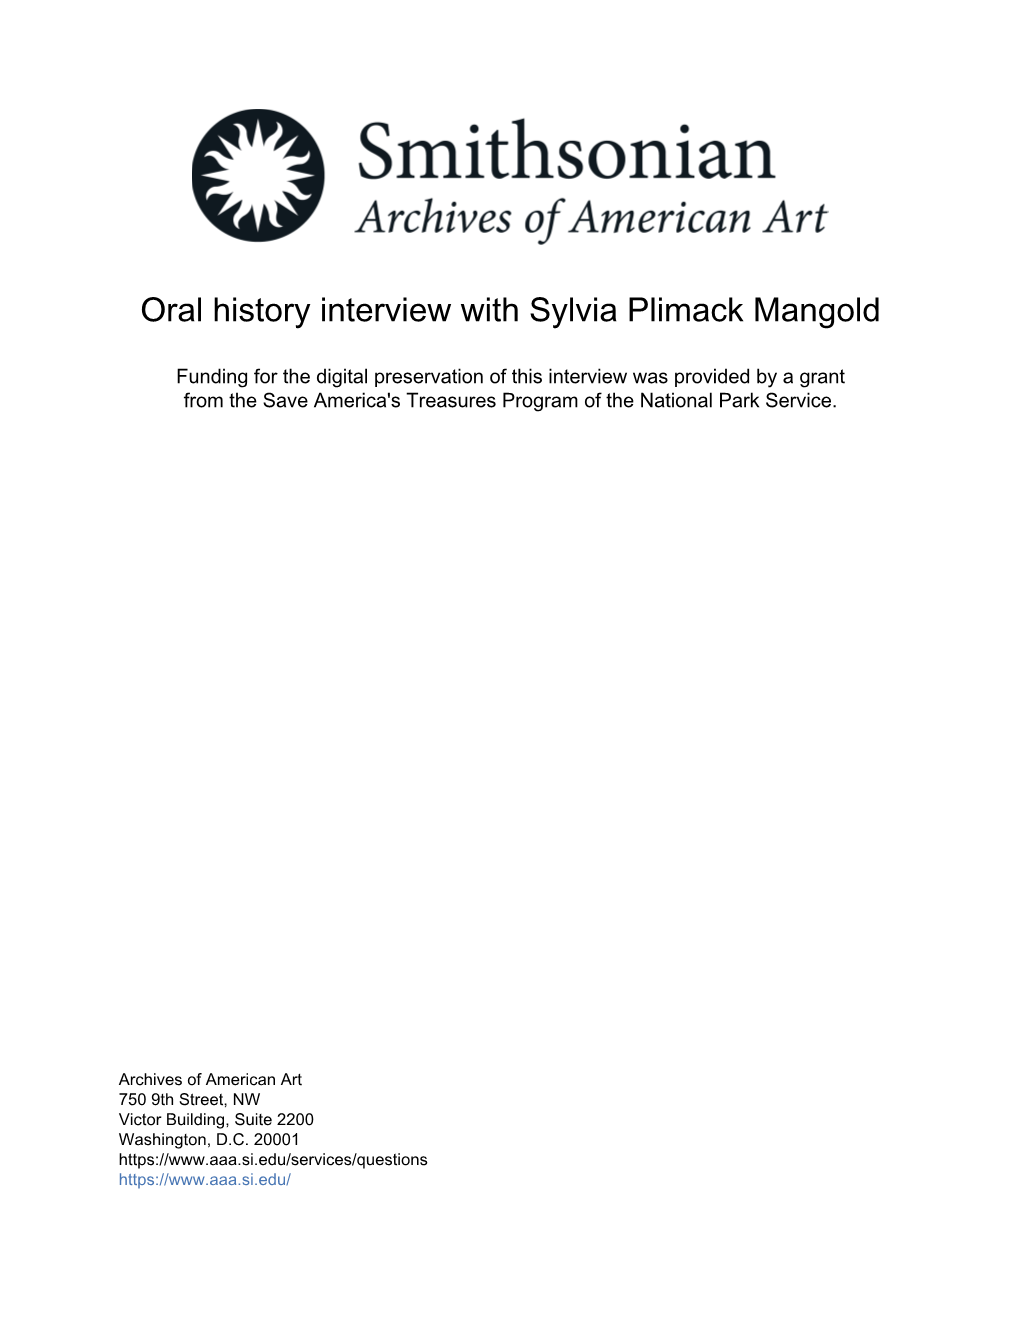 Oral History Interview with Sylvia Plimack Mangold